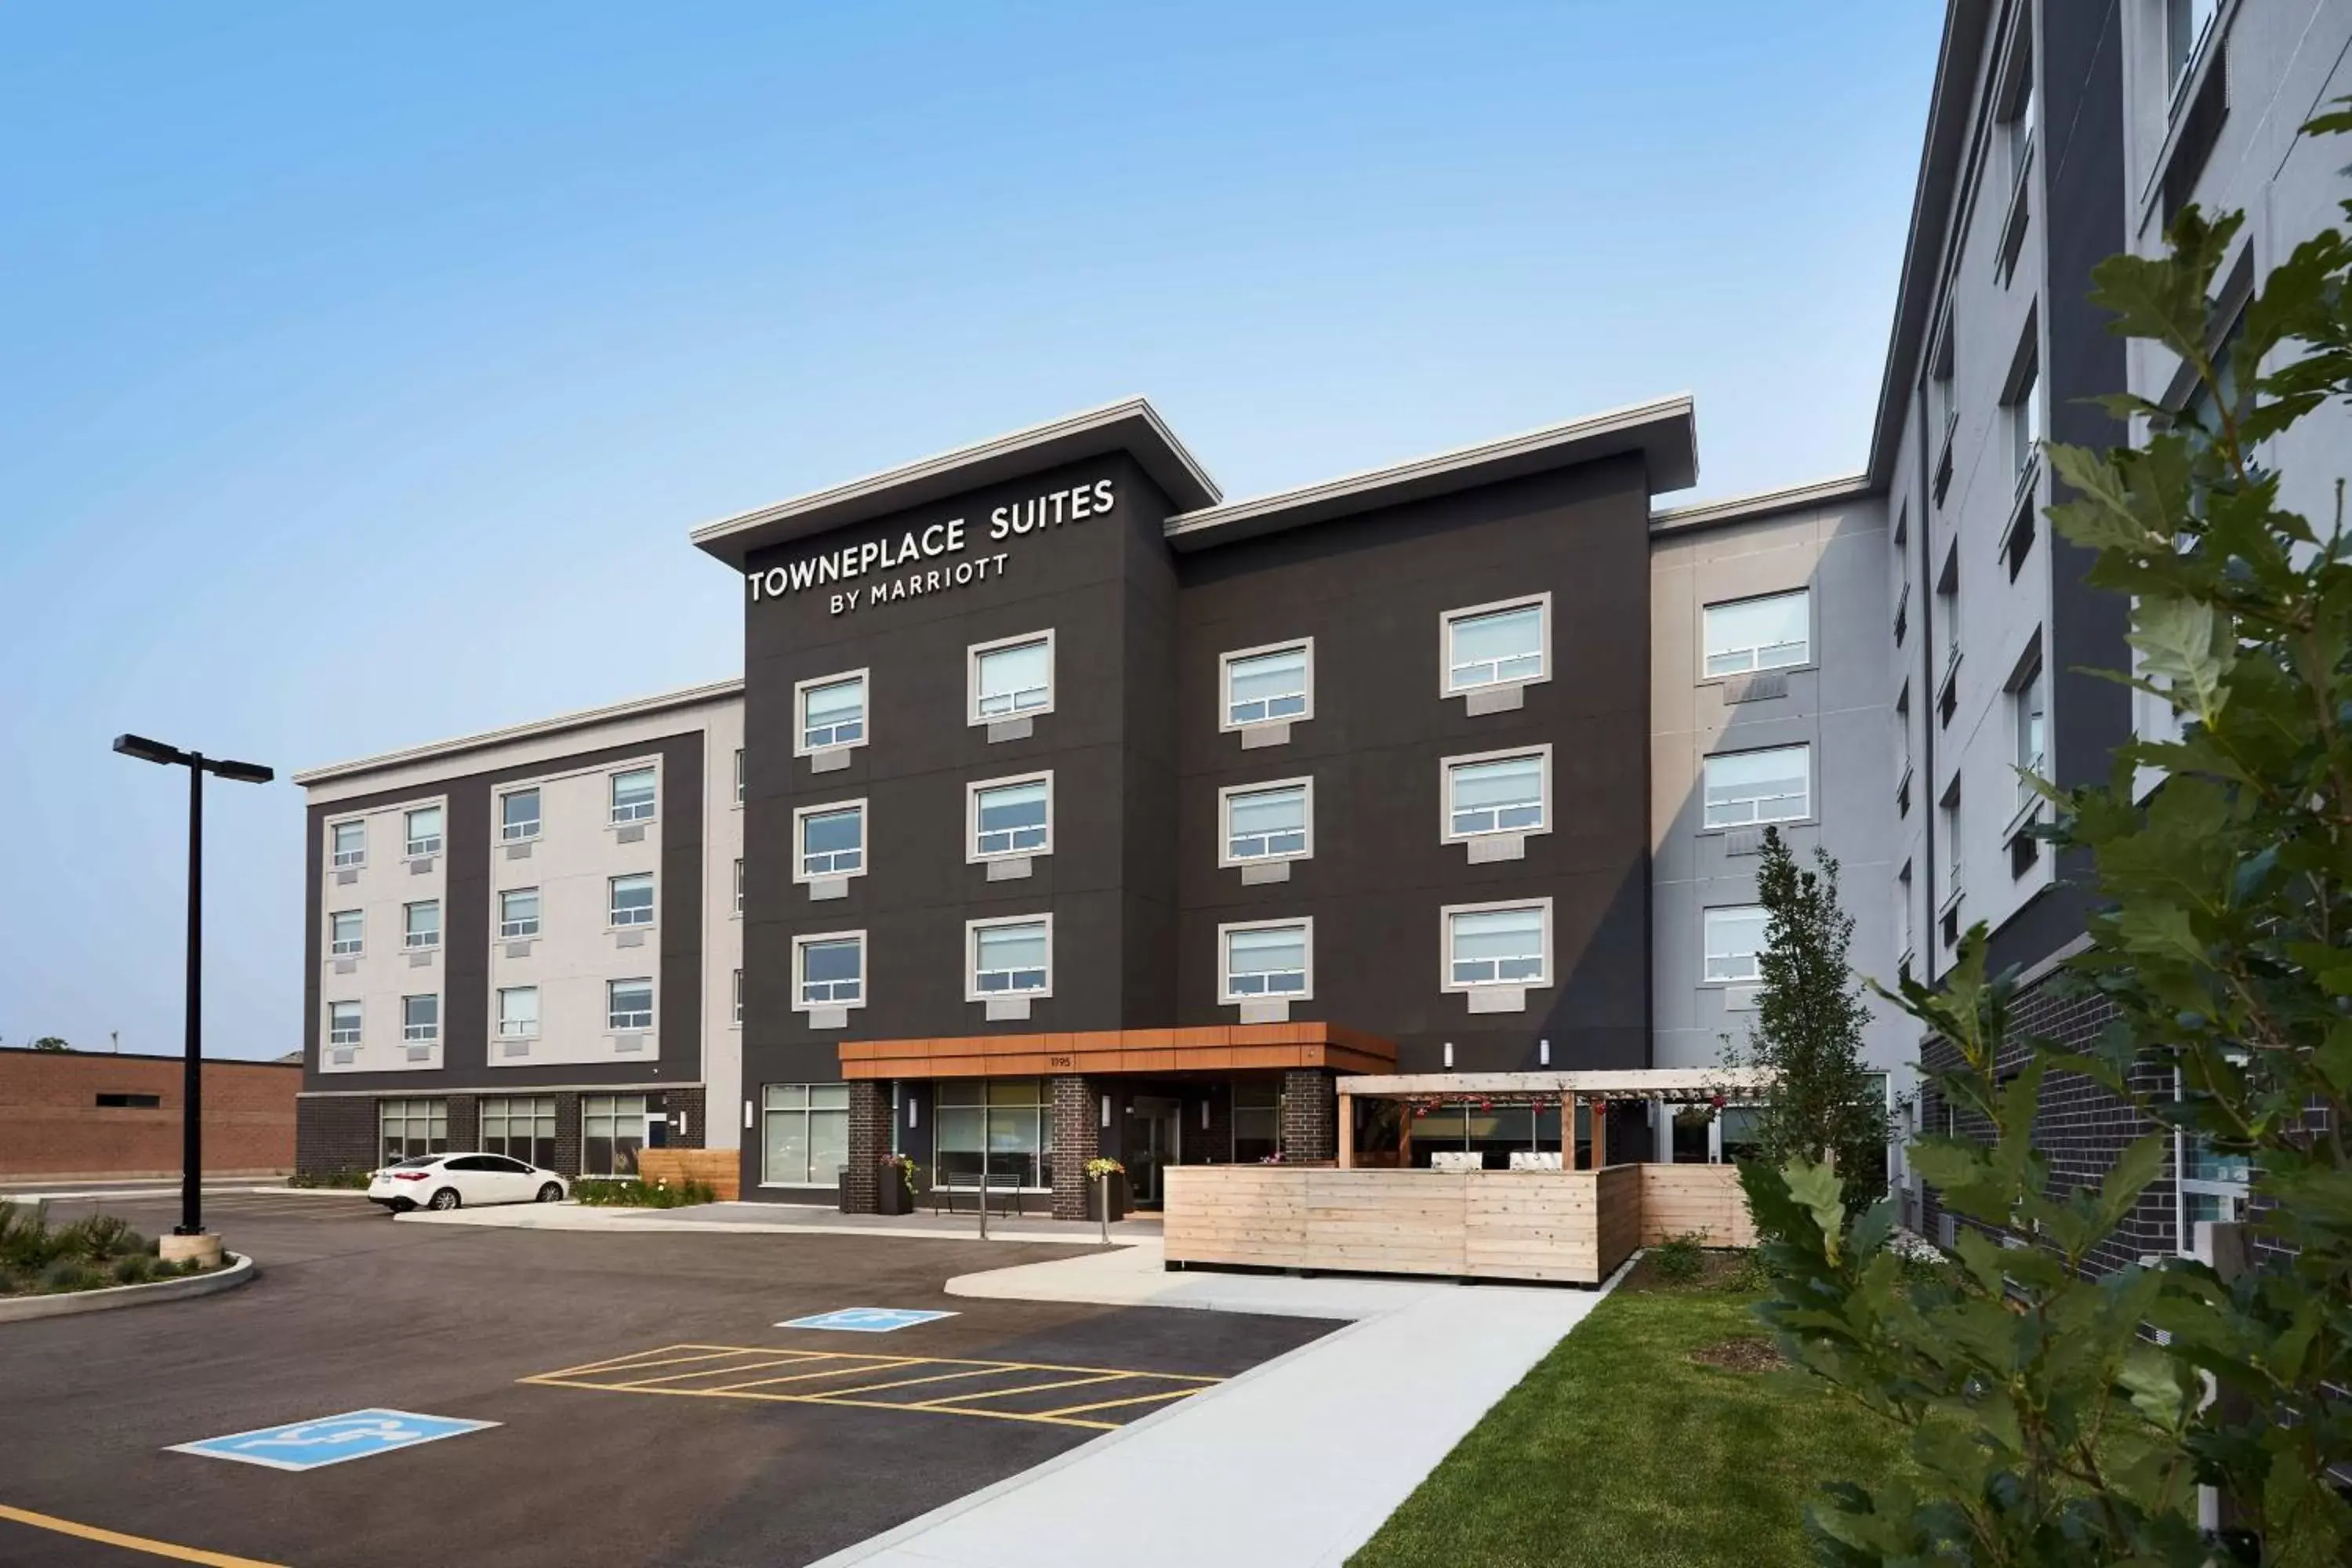 Property Building in TownePlace Suites by Marriott Hamilton